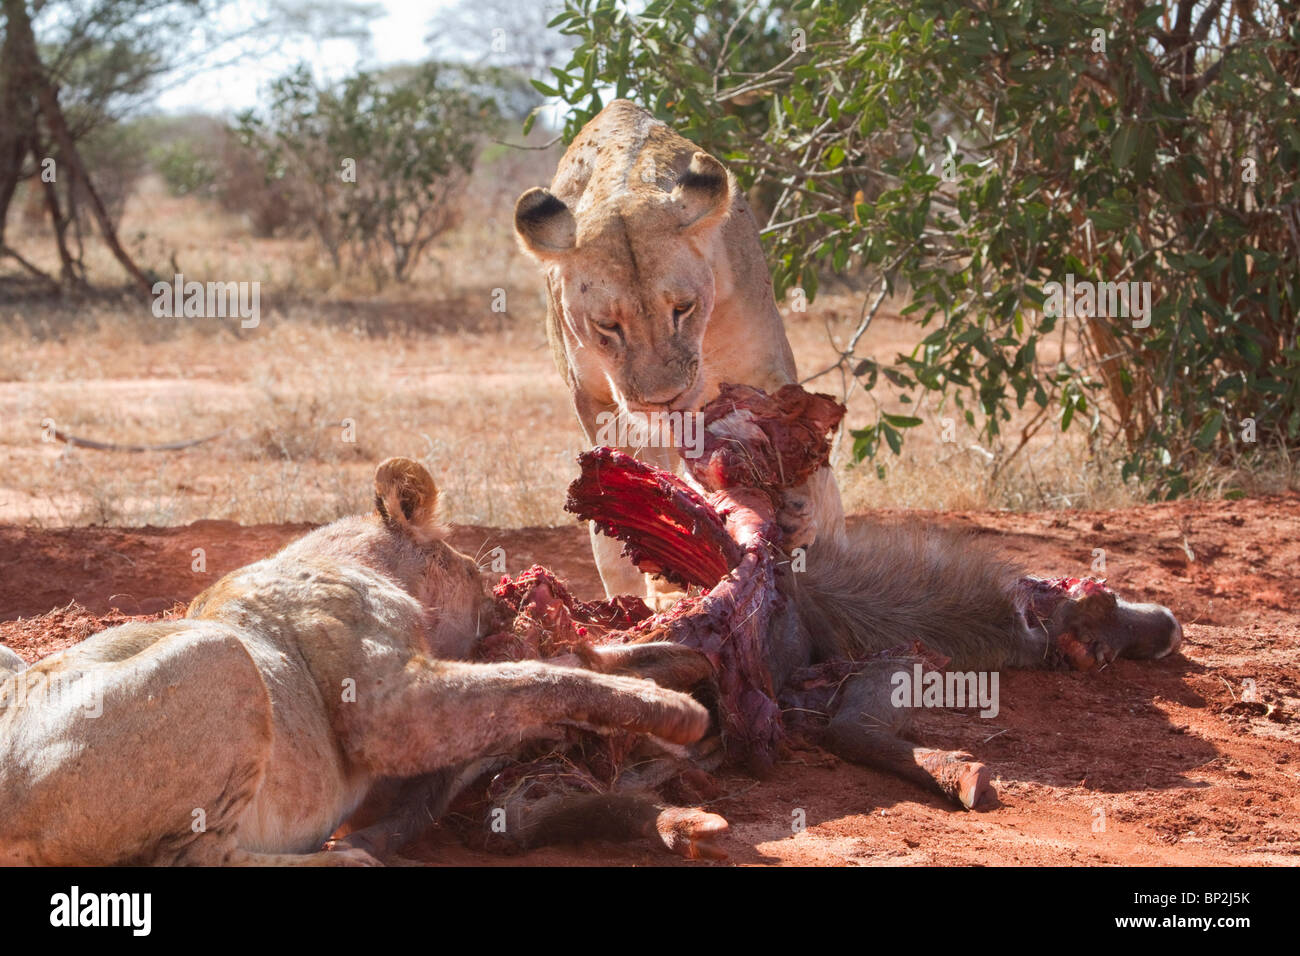 African Lioness (Panthera Leo) with a cub, eating the killed waterbuck (Kobus ellipsiprymnus), Tsavo East National park, Kenya. Stock Photo